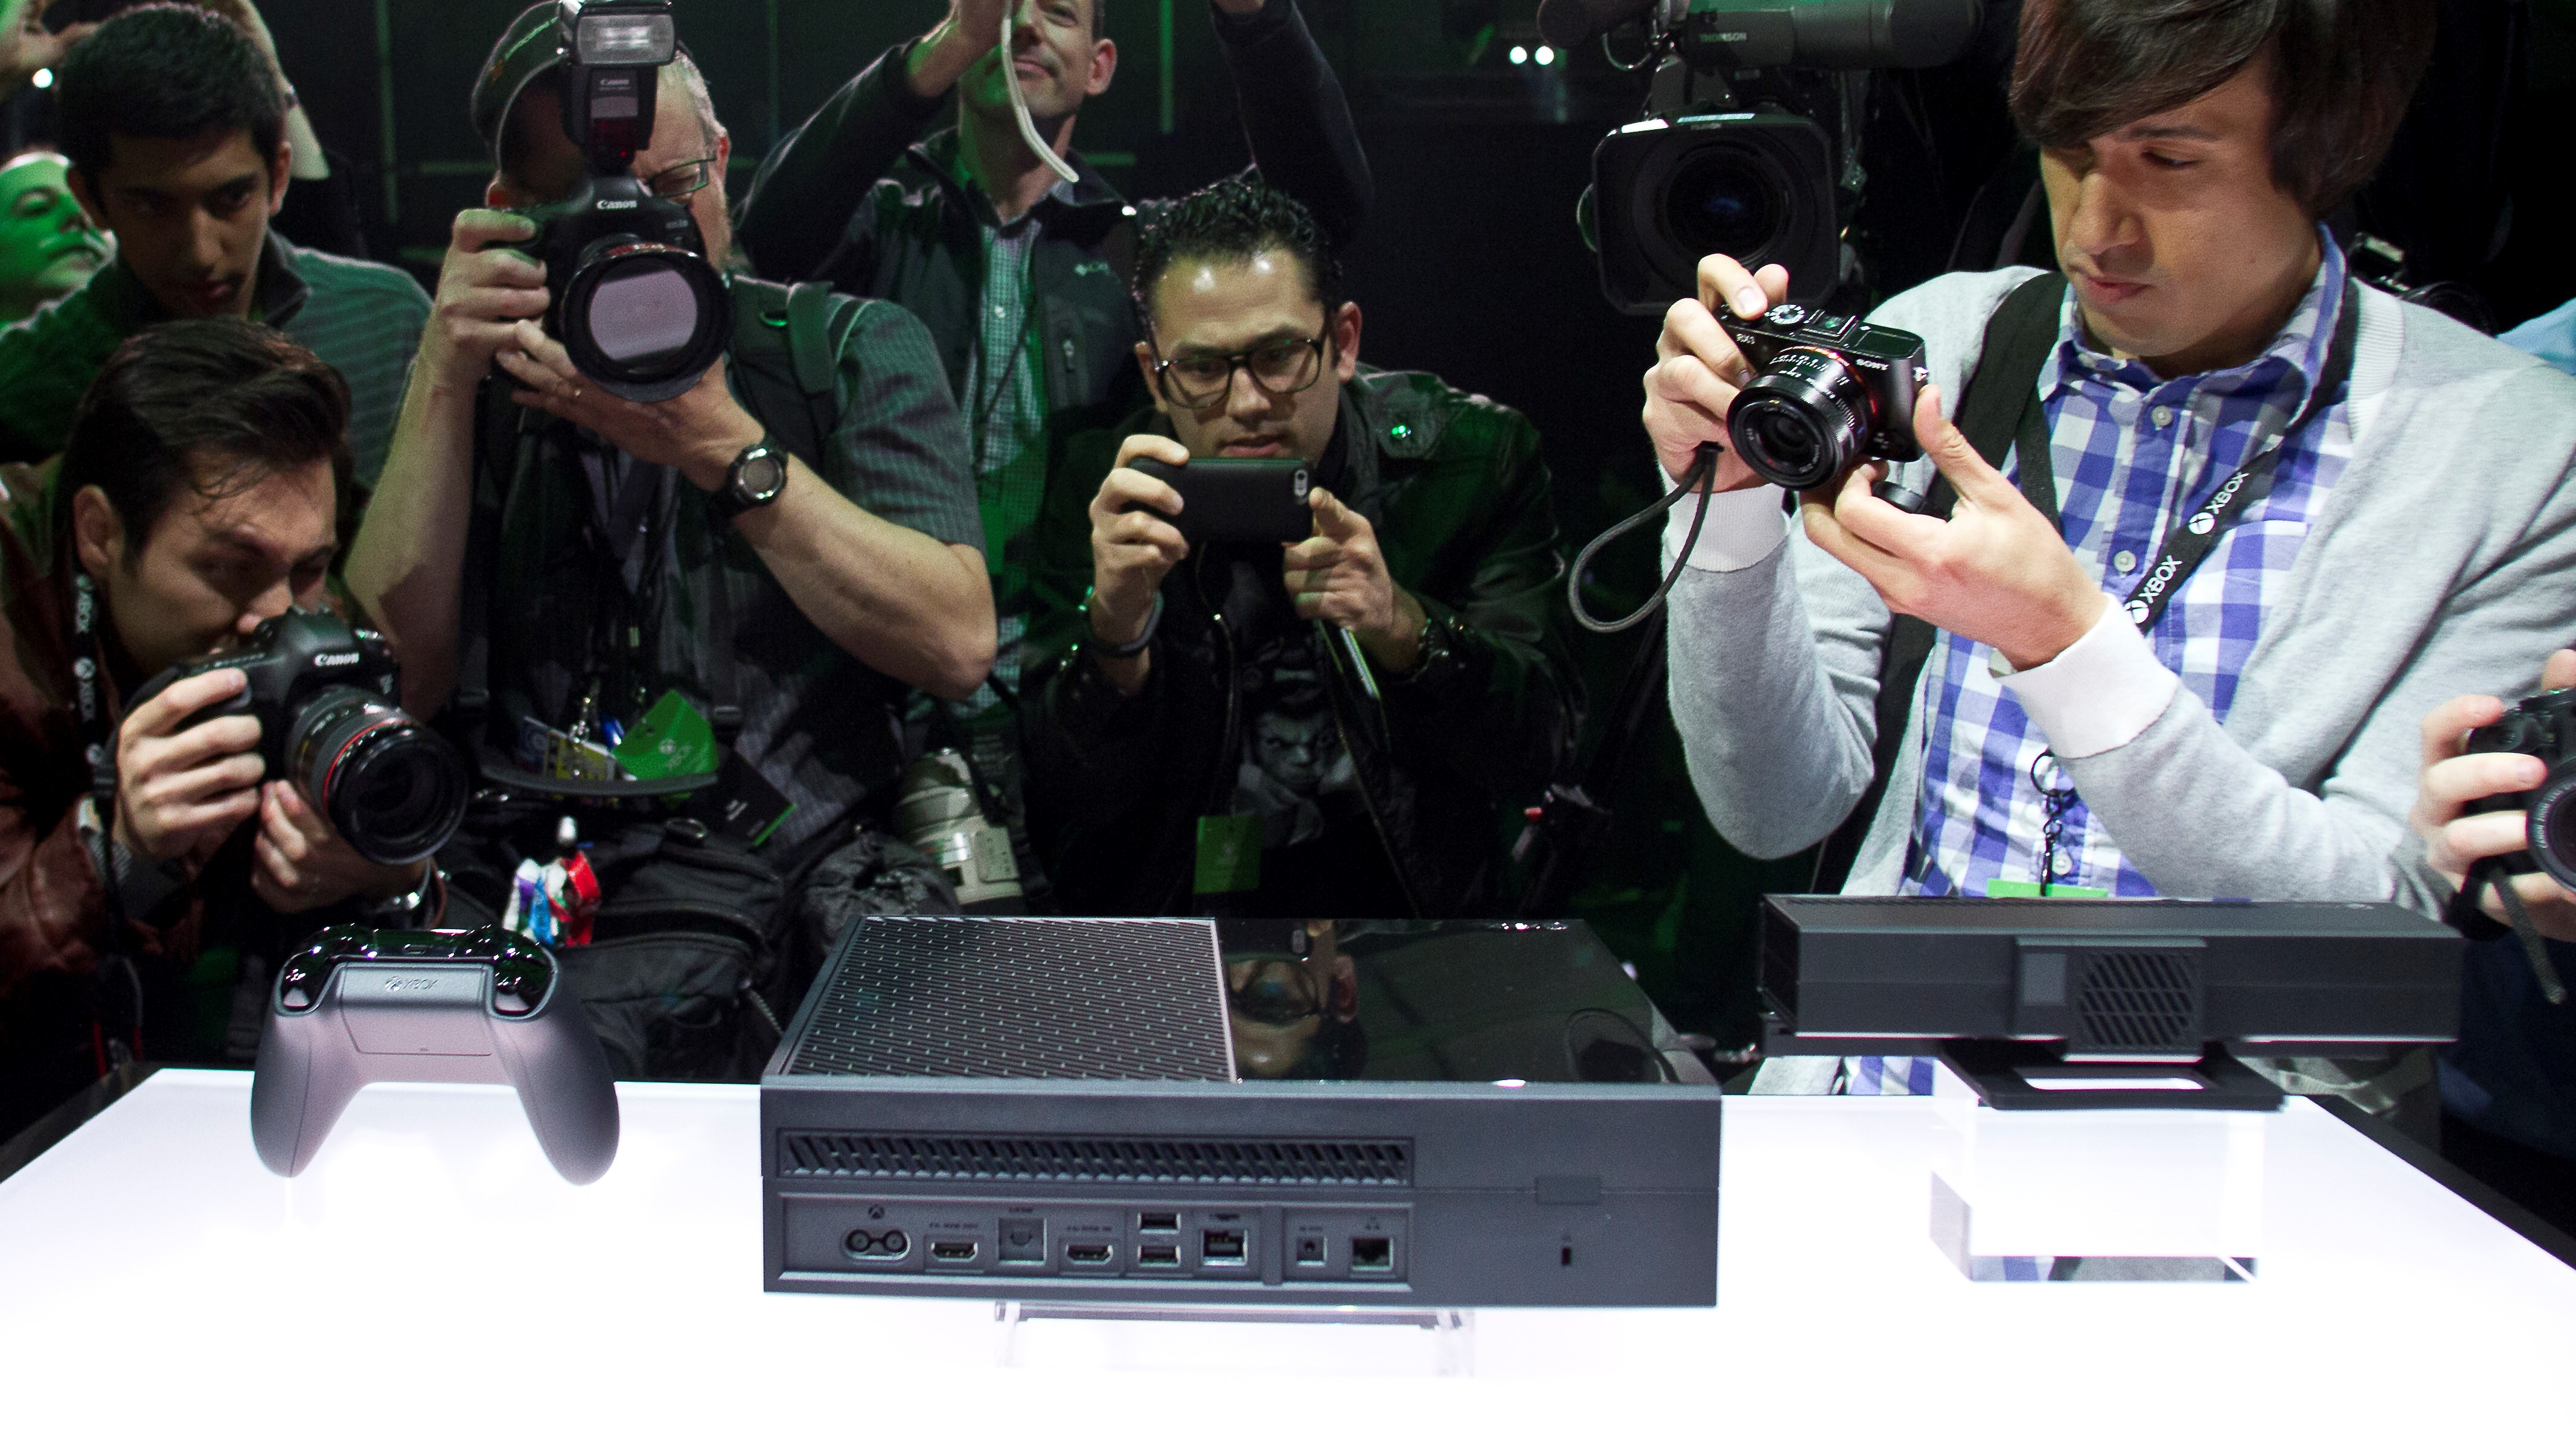 The Original Design Of The Xbox One Was Rushed Admits Xbox Boss Xbox News